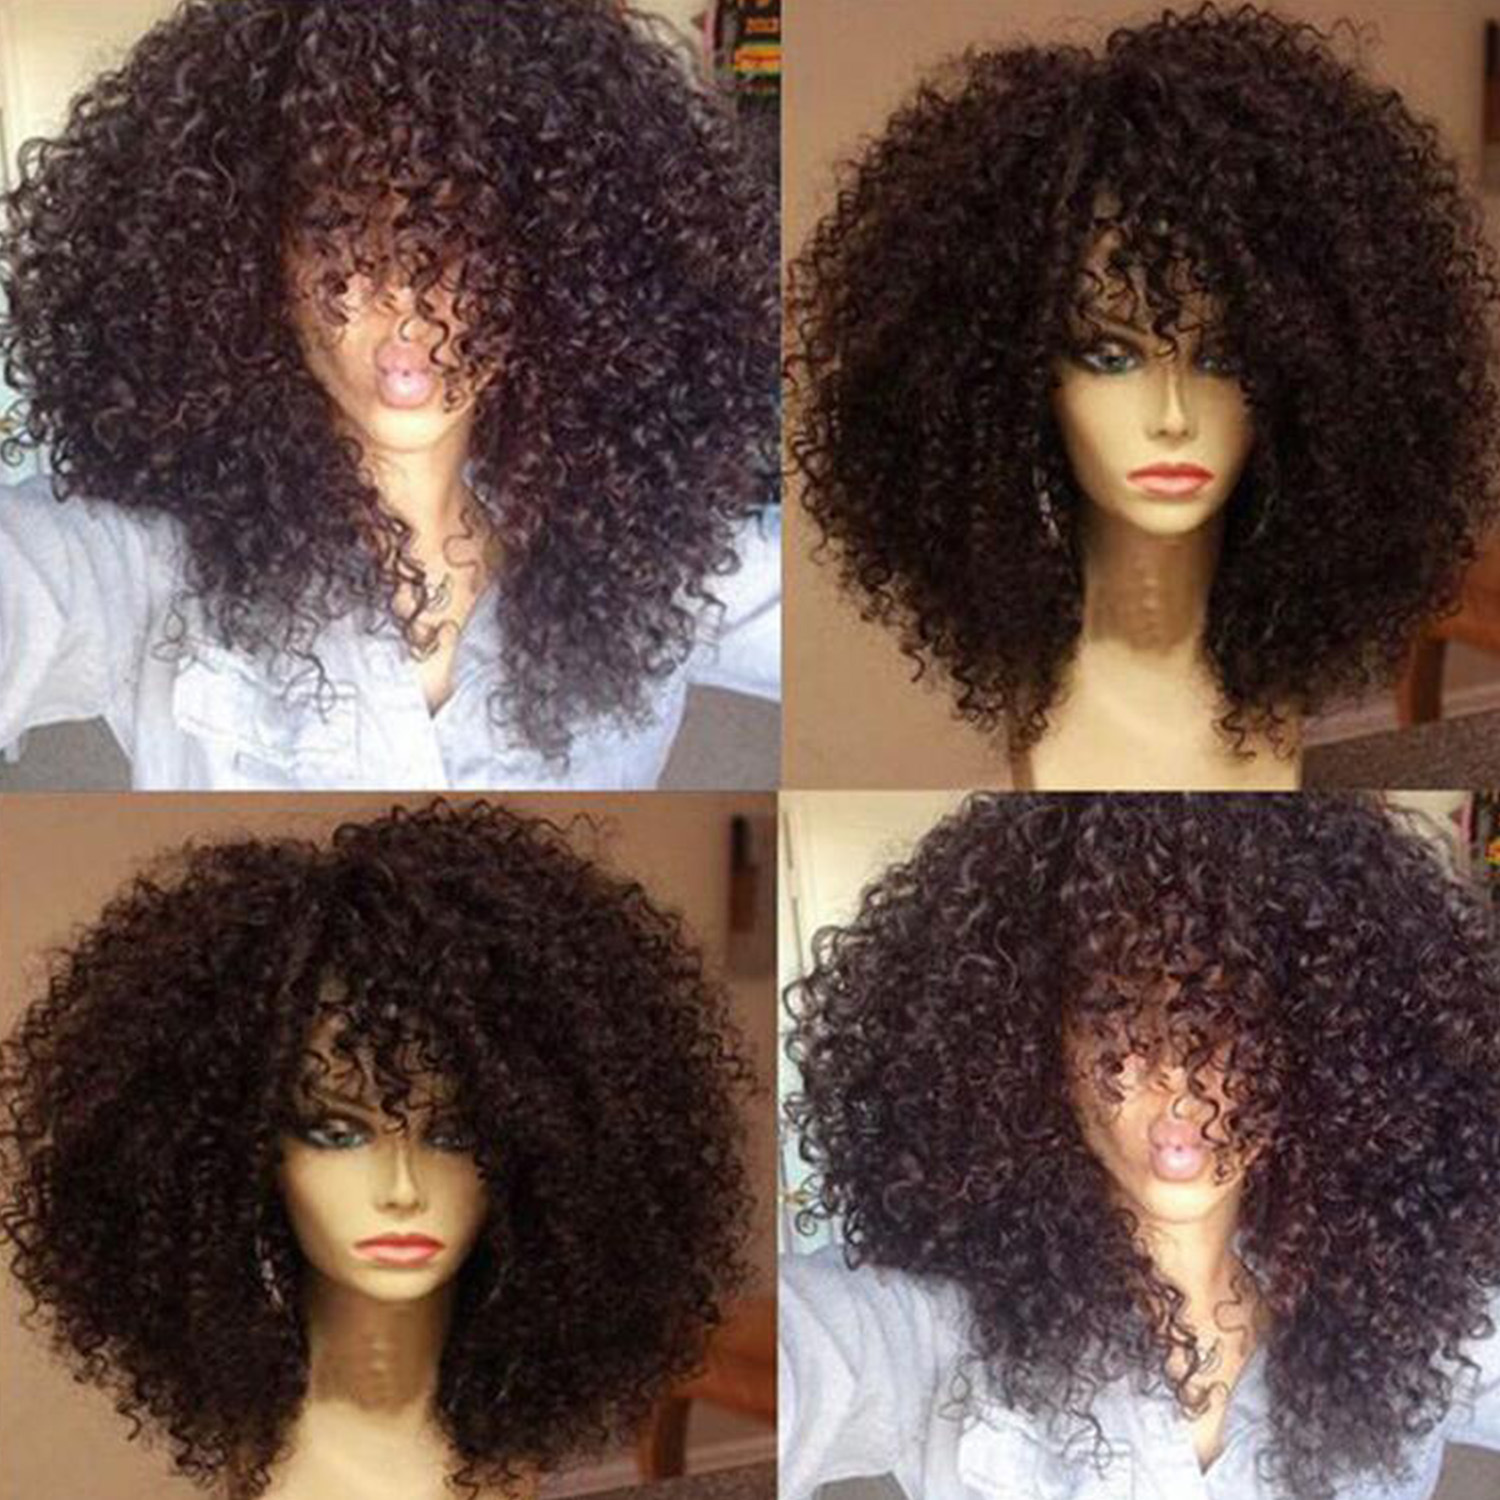 Fashionable black synthetic wig with small curly hair, styled in a fluffy explosive head wig afro style